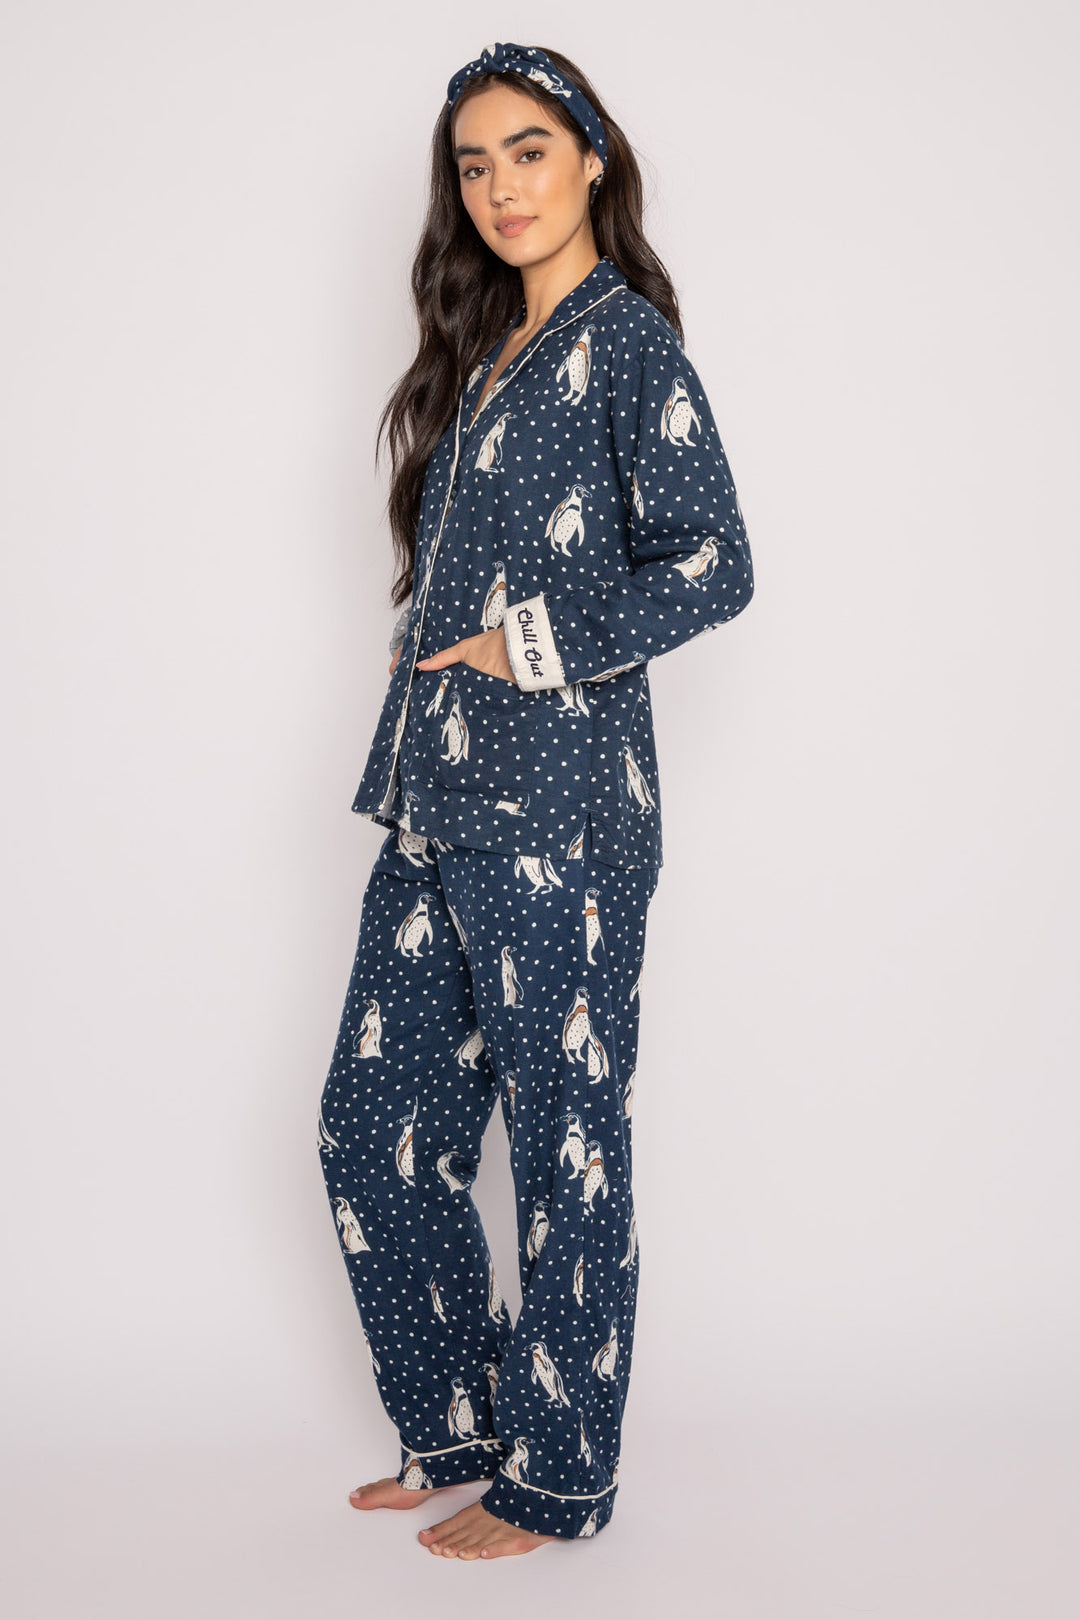 Navy flannel pj set in cotton with white penguin pattern. With matching hair wrap. (7231869517924)